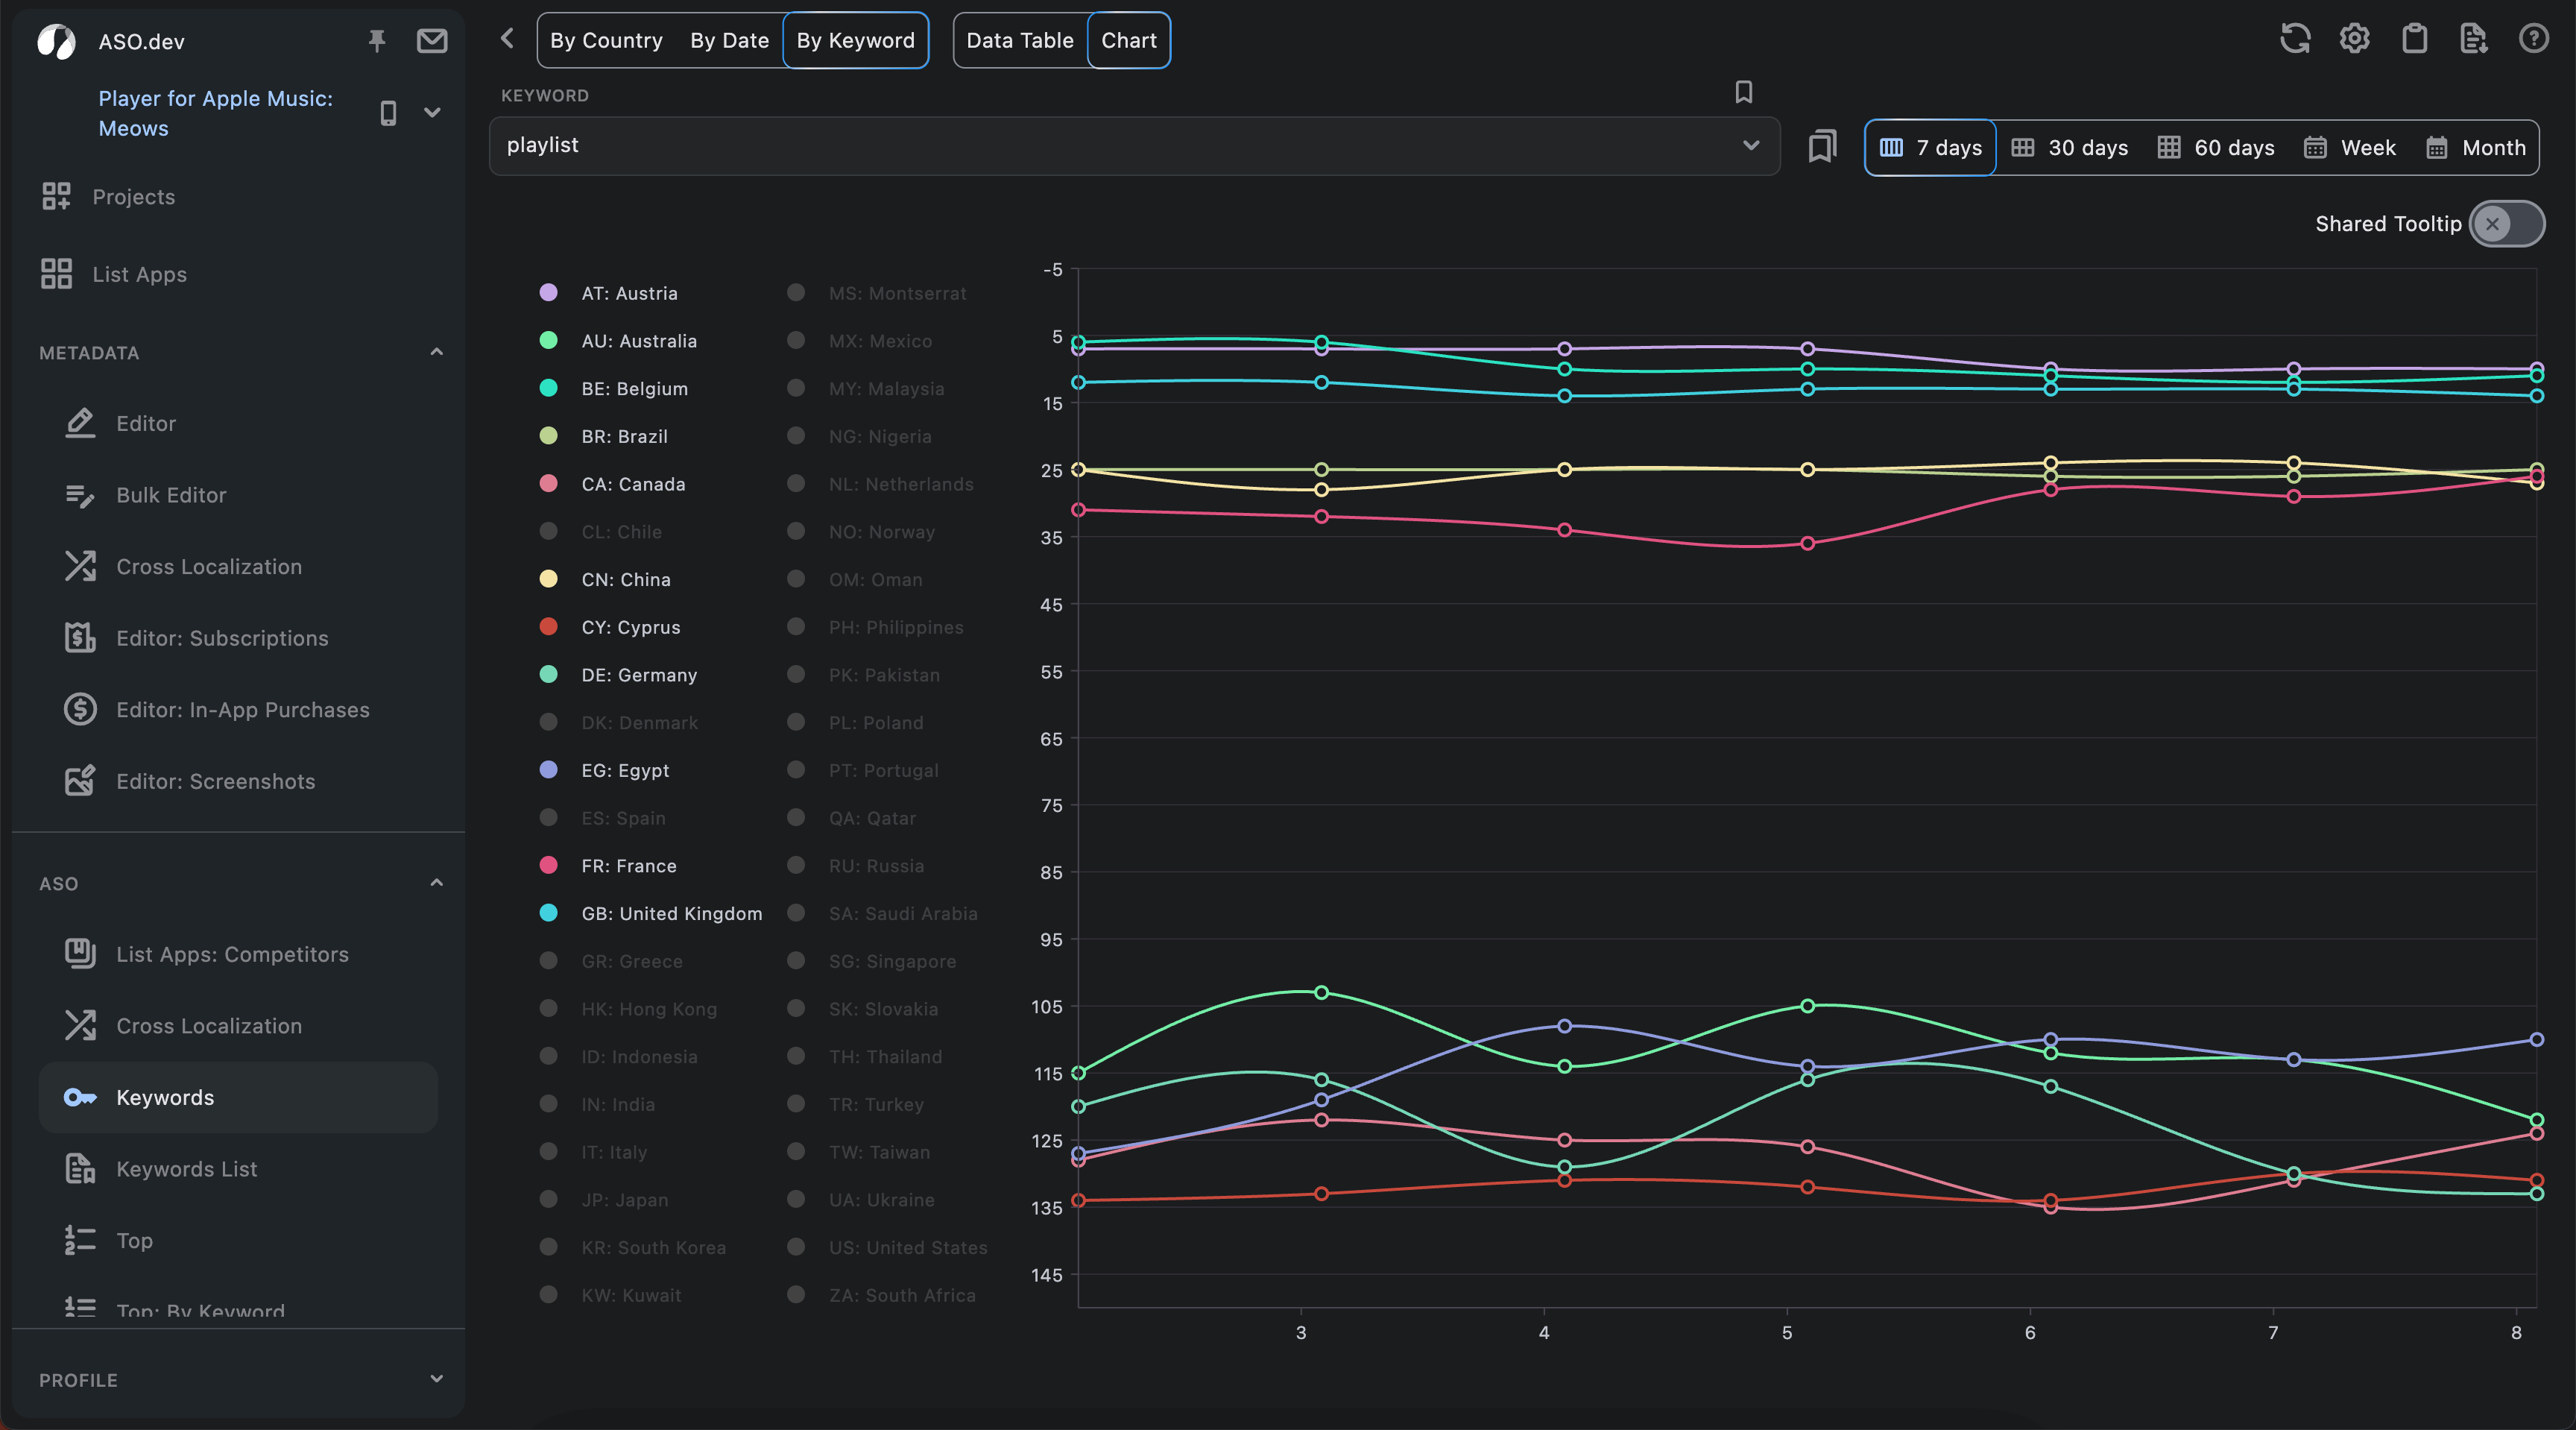 Chart view by Keyword